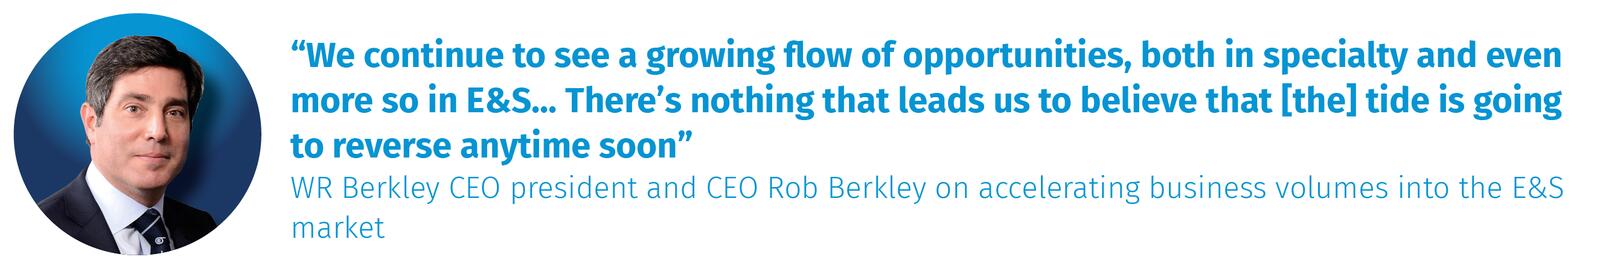 WR Berkley CEO president and CEO Rob Berkley on accelerating business volumes into the E&S market